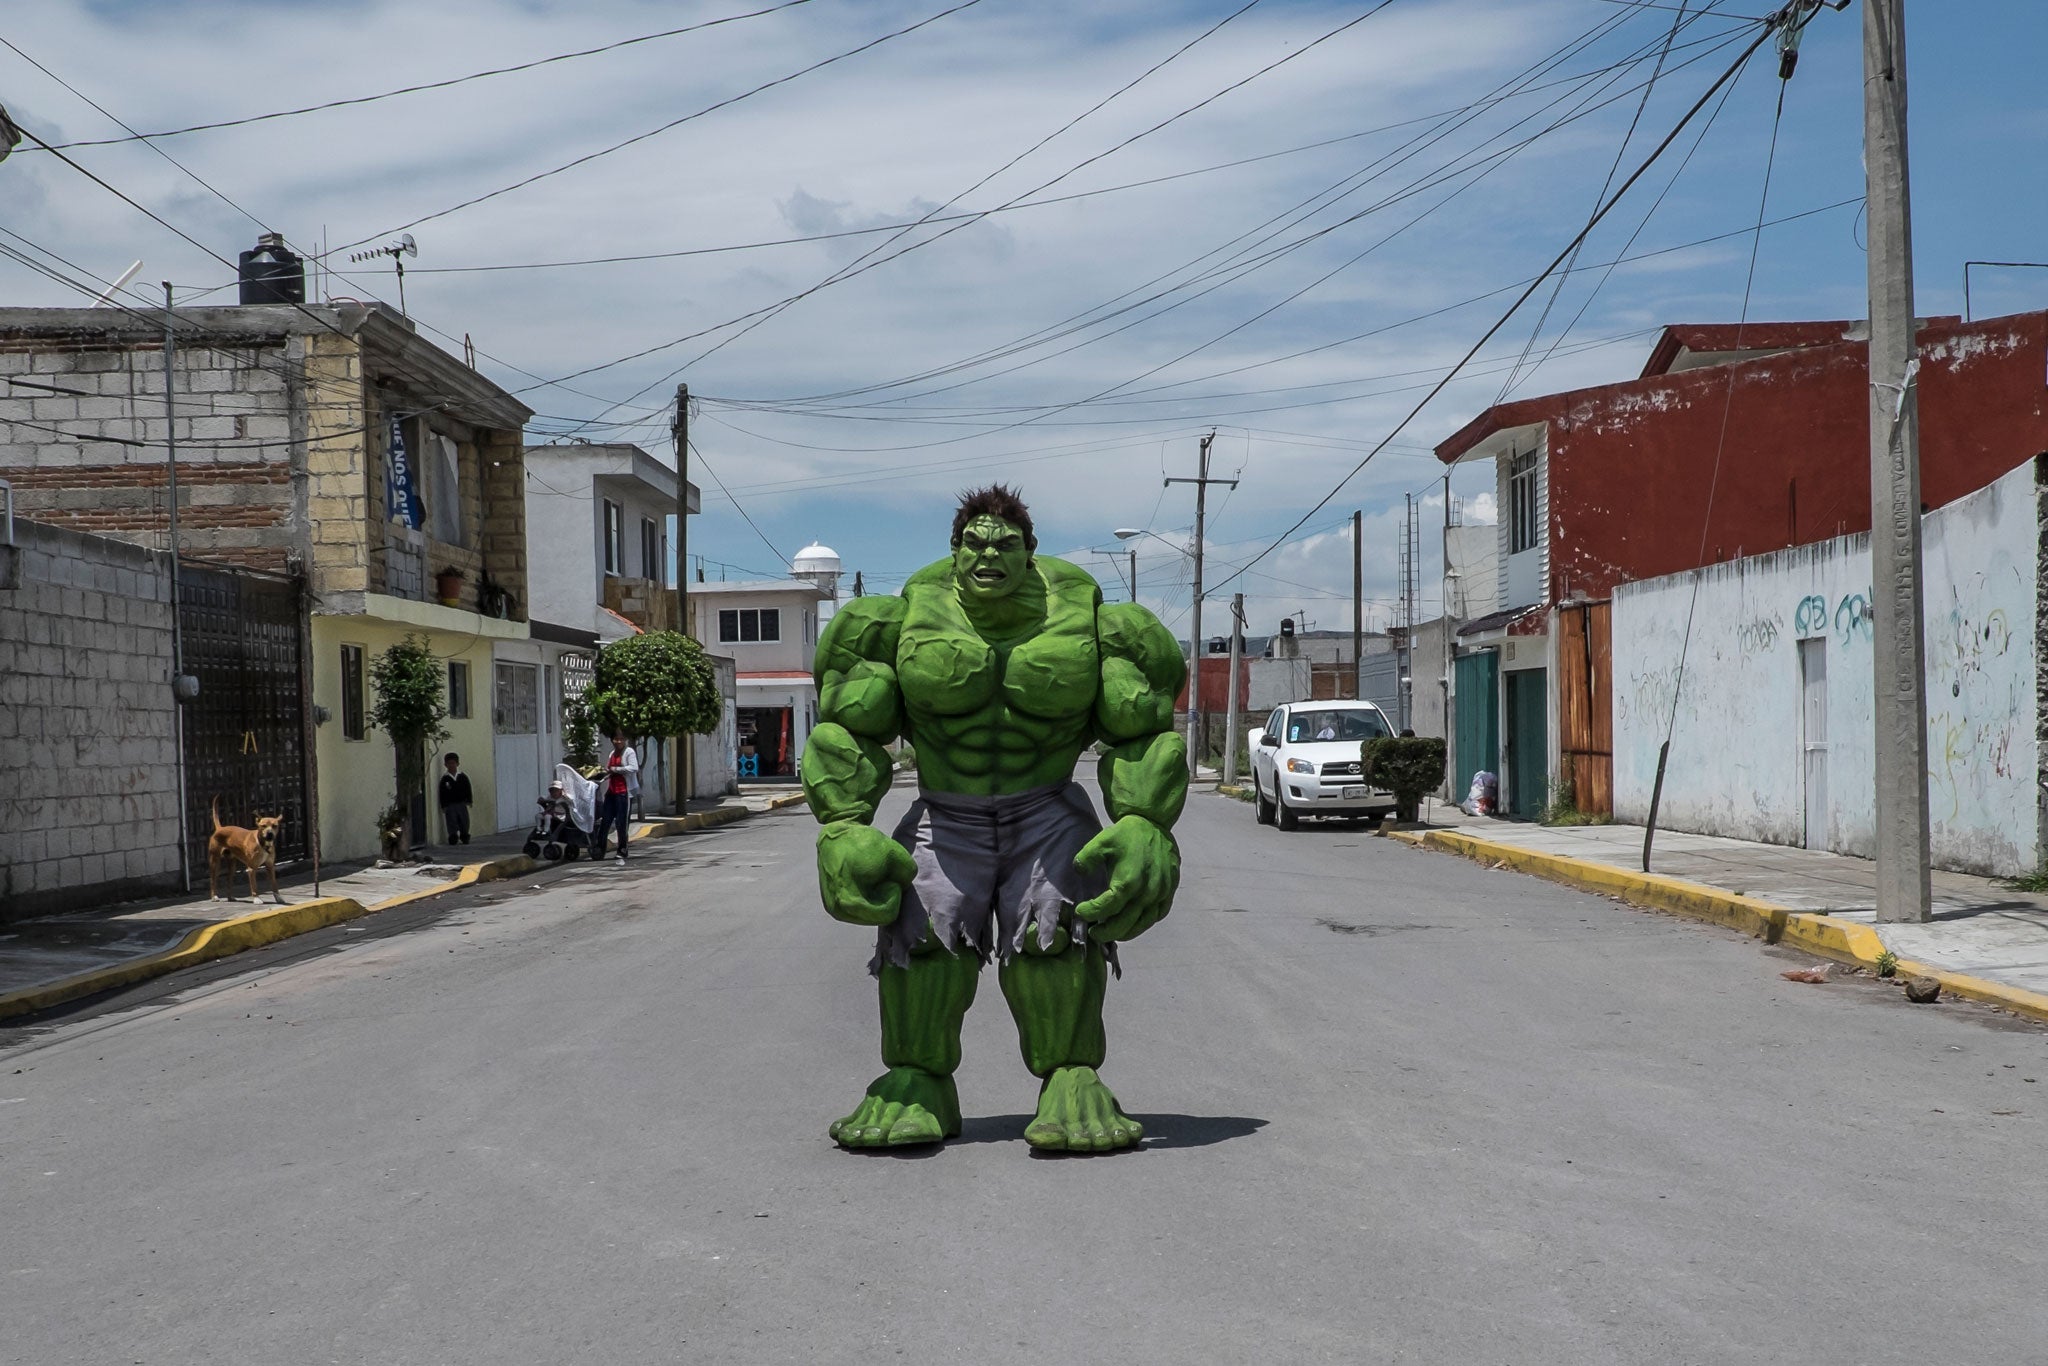 Don't make me angry: The Incredible Hulk in Mexico city